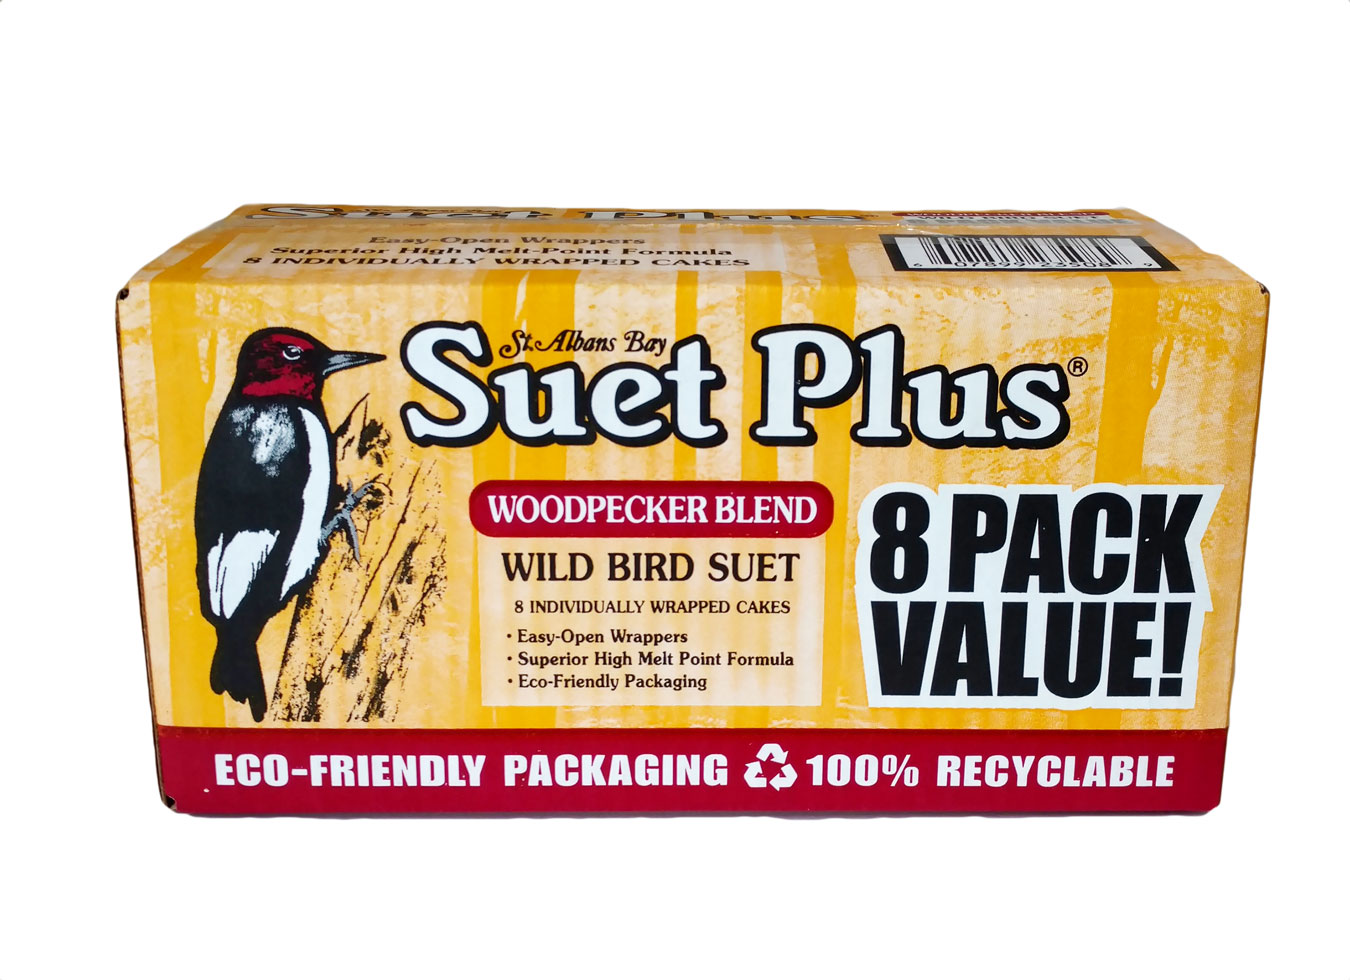 8 Pack Value – Woodpecker